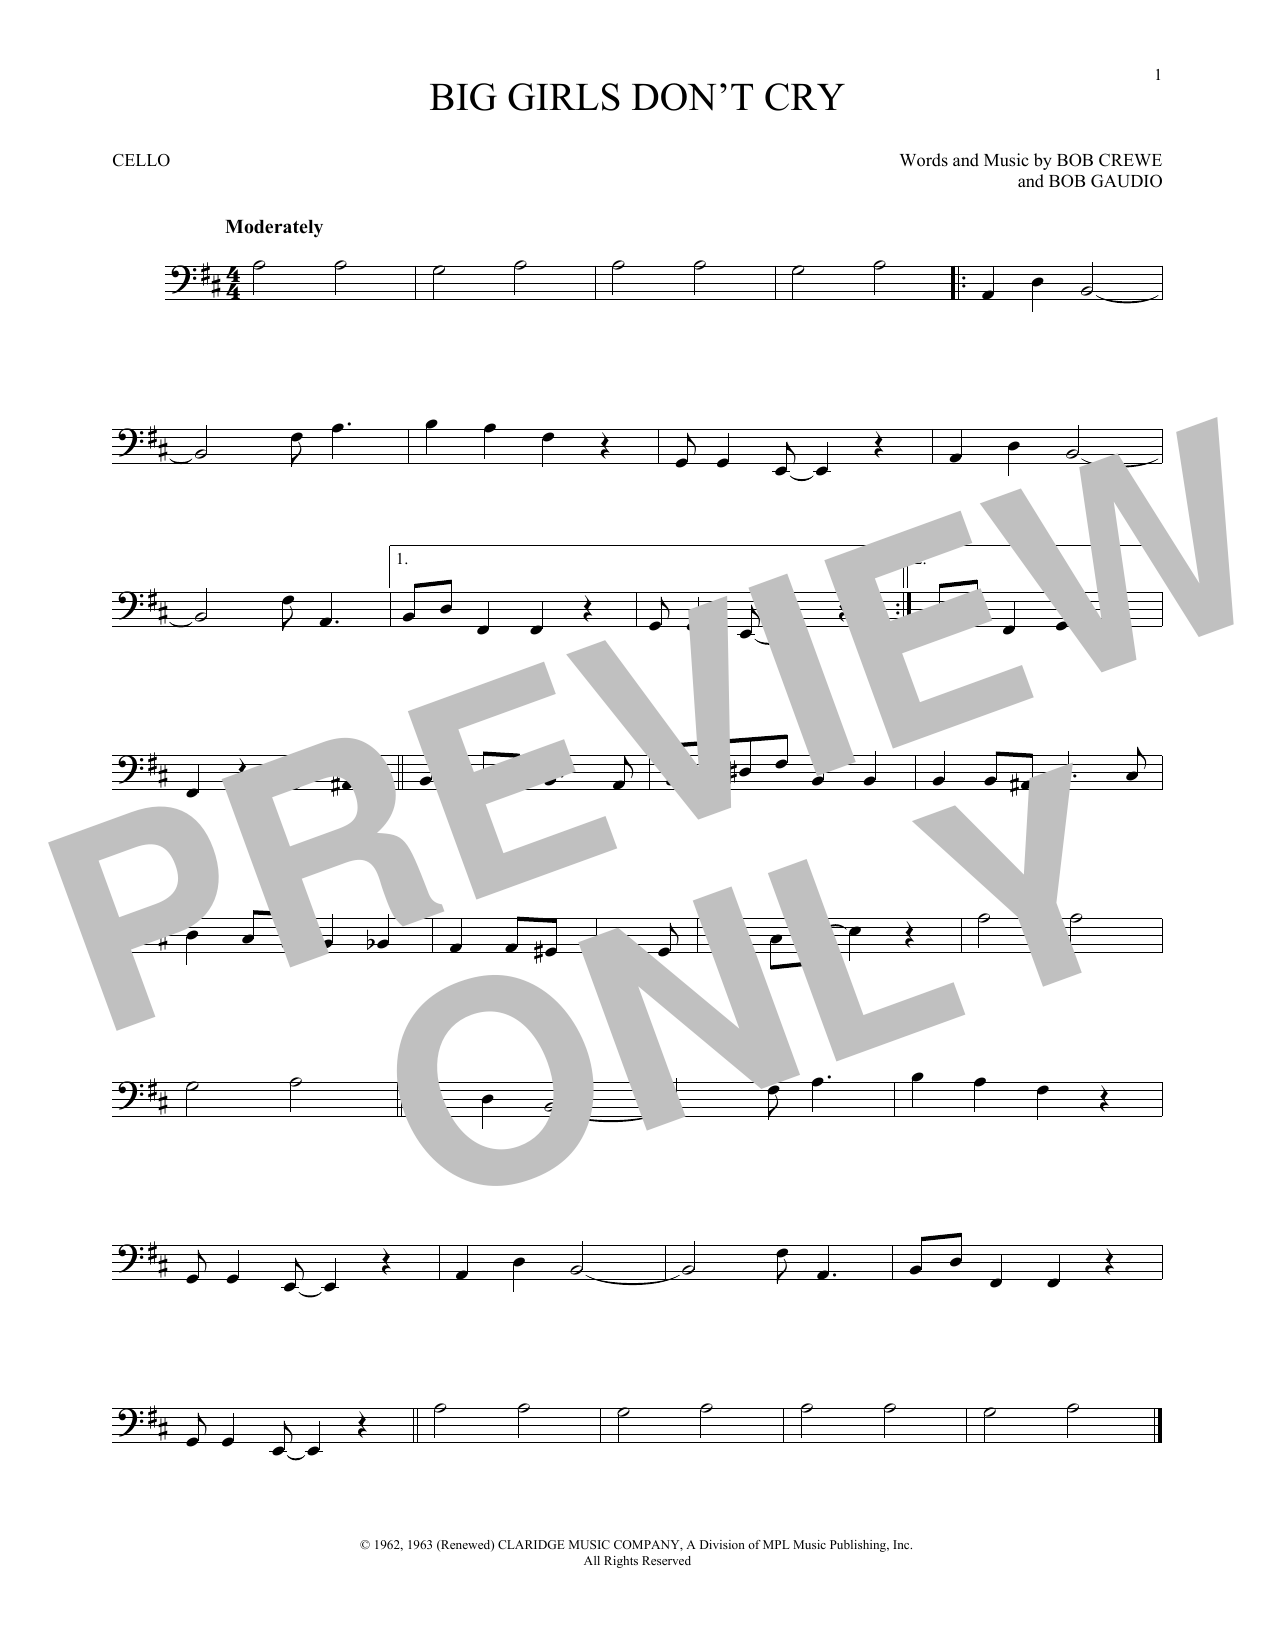 Download The Four Seasons Big Girls Don't Cry Sheet Music